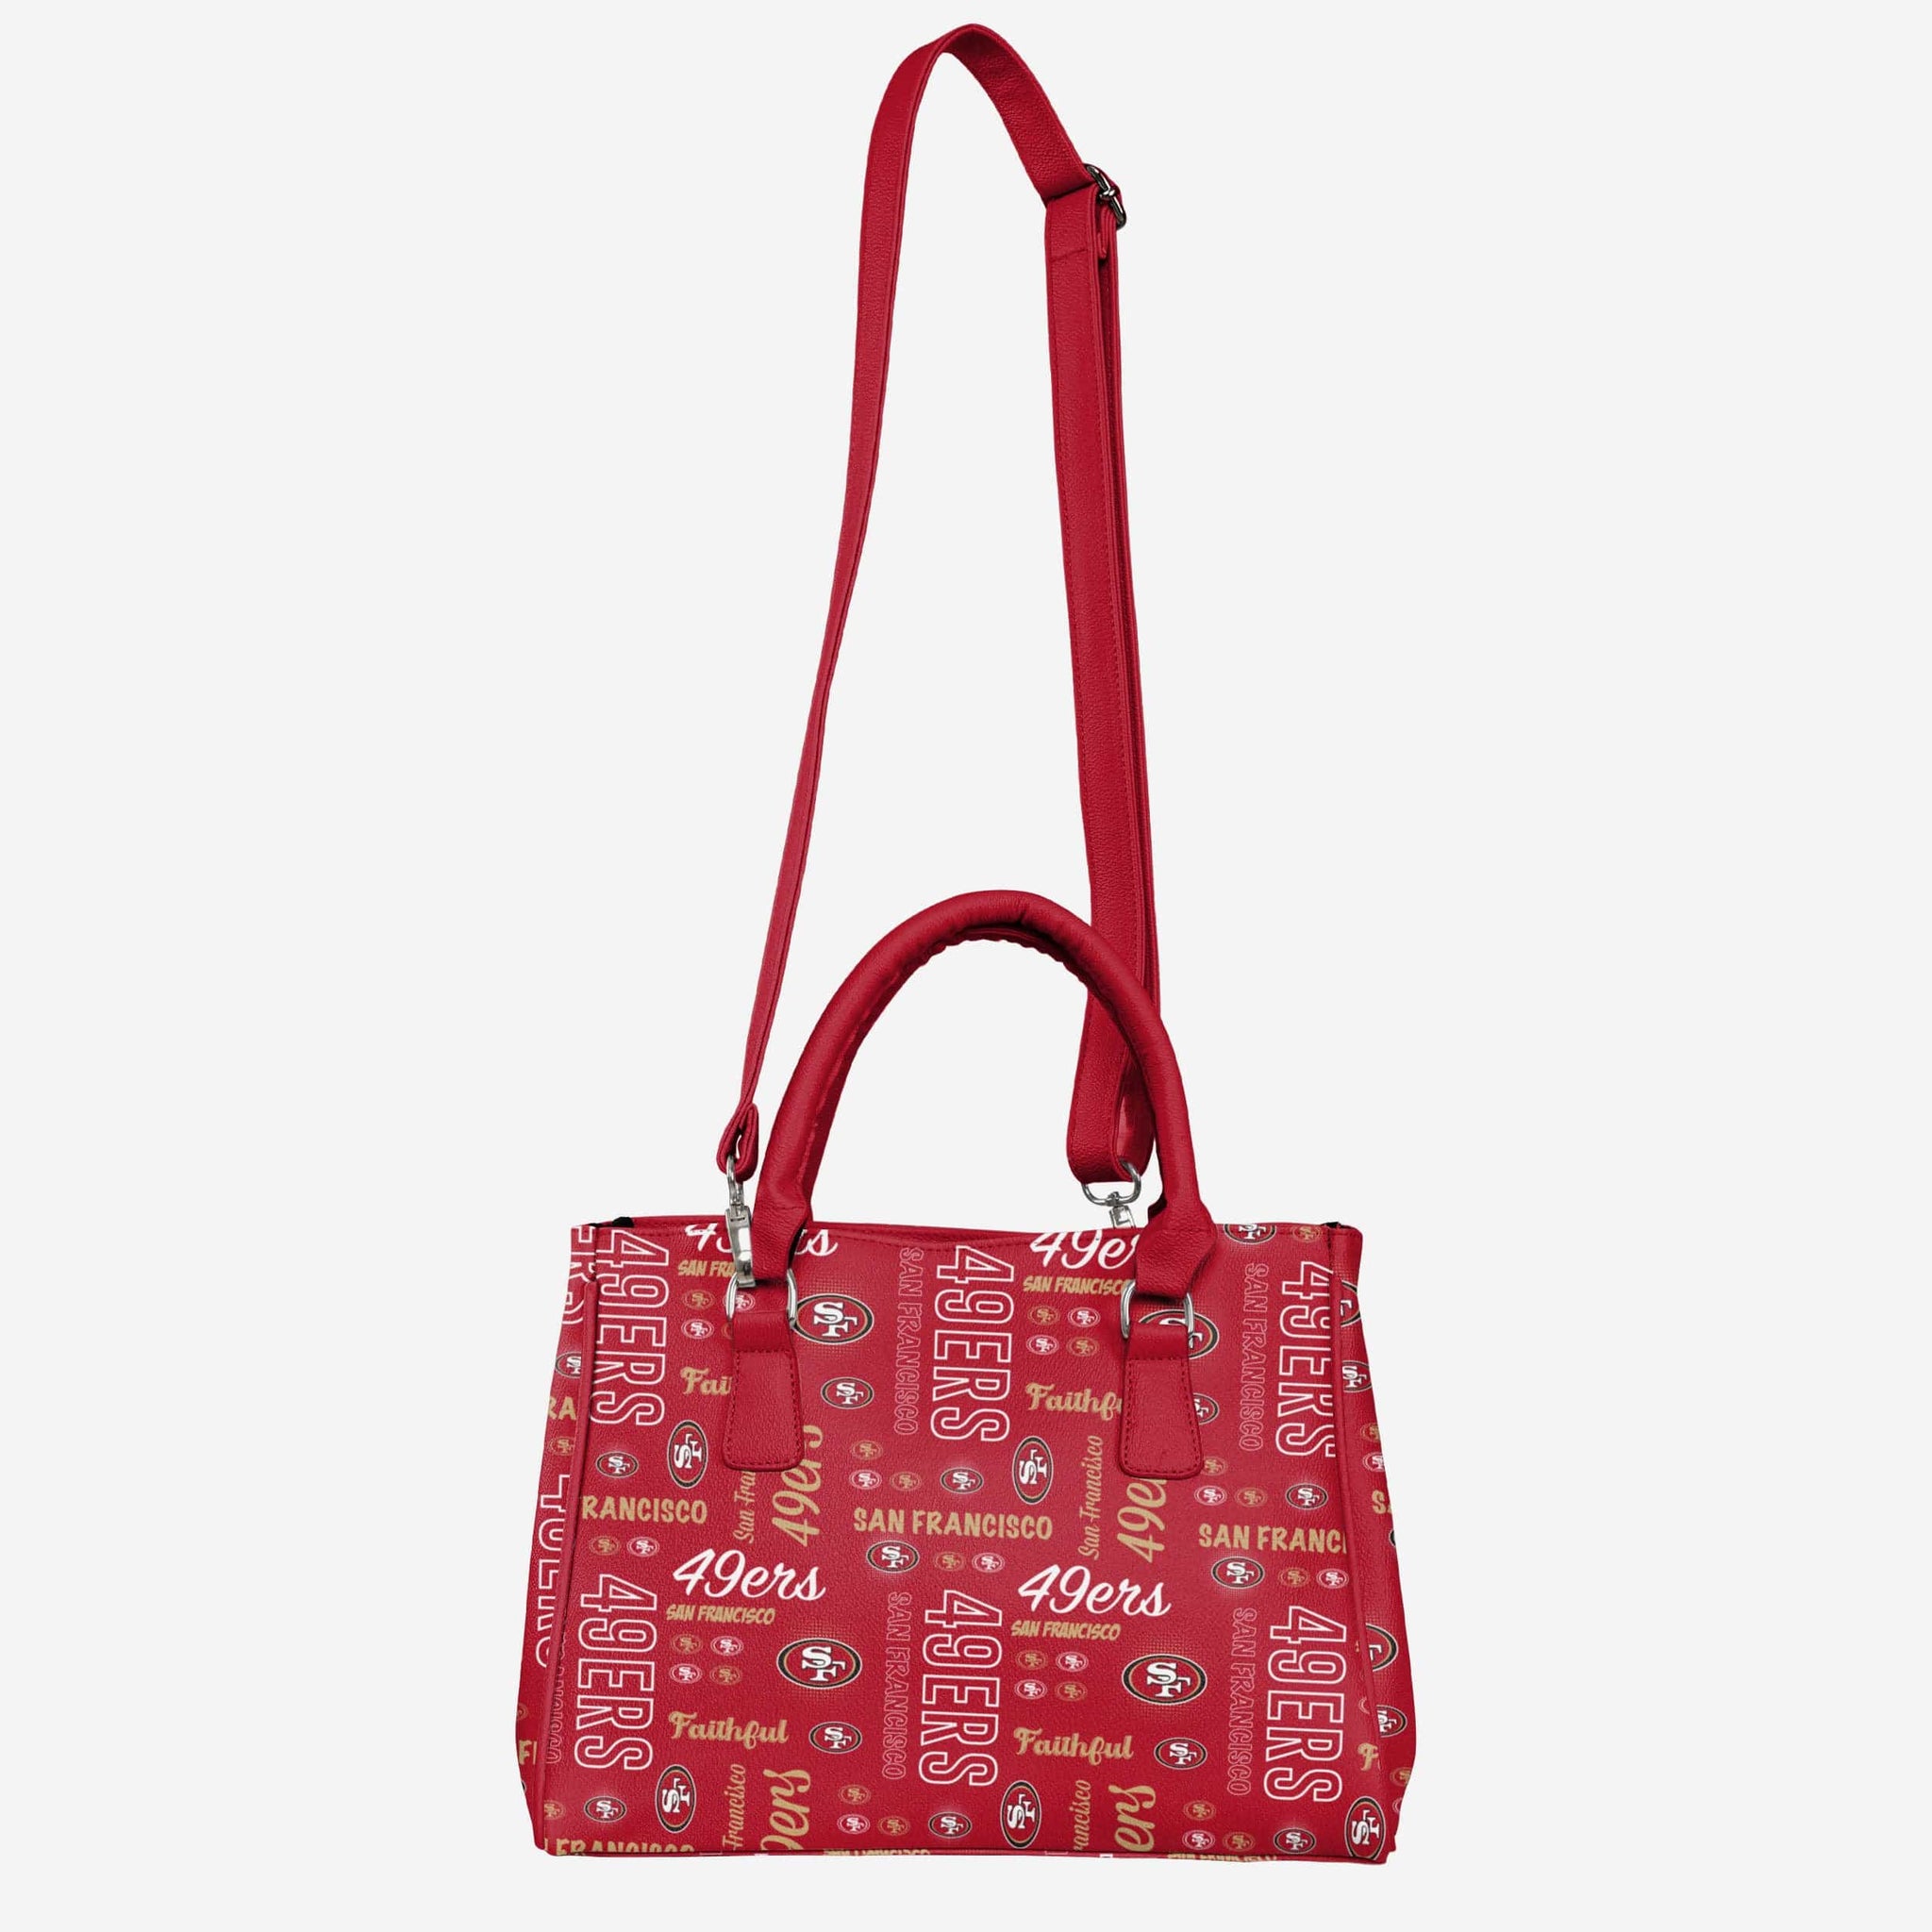 GUESS - Get a FREE Red tote bag for a minimum purchase of